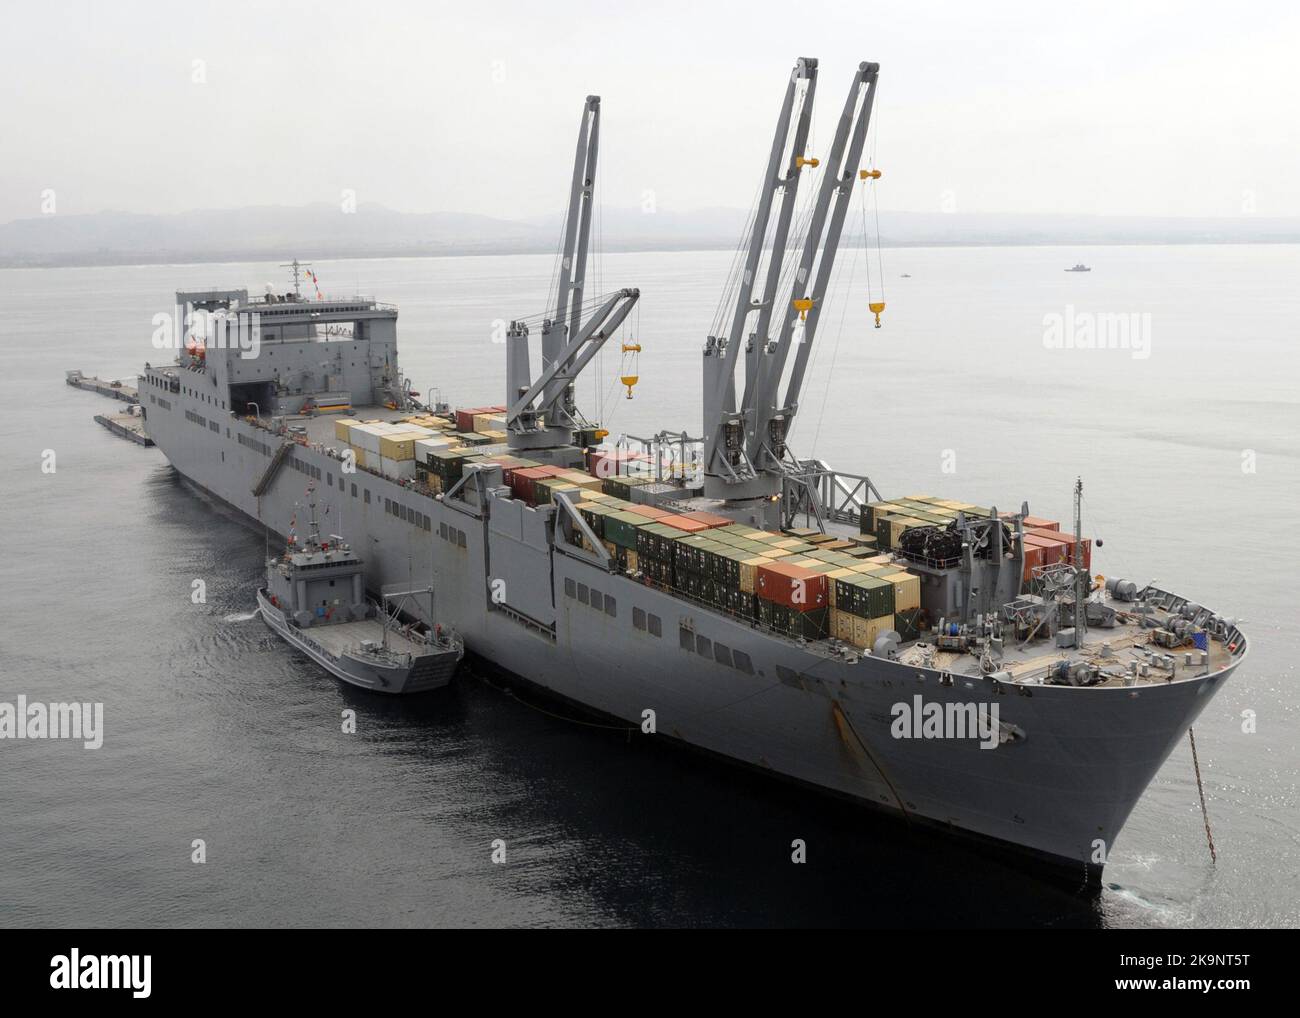 The Military Sealift Command large, medium-speed roll-on/roll-off ship USNS Pililaau (T-AKR 304) Stock Photo